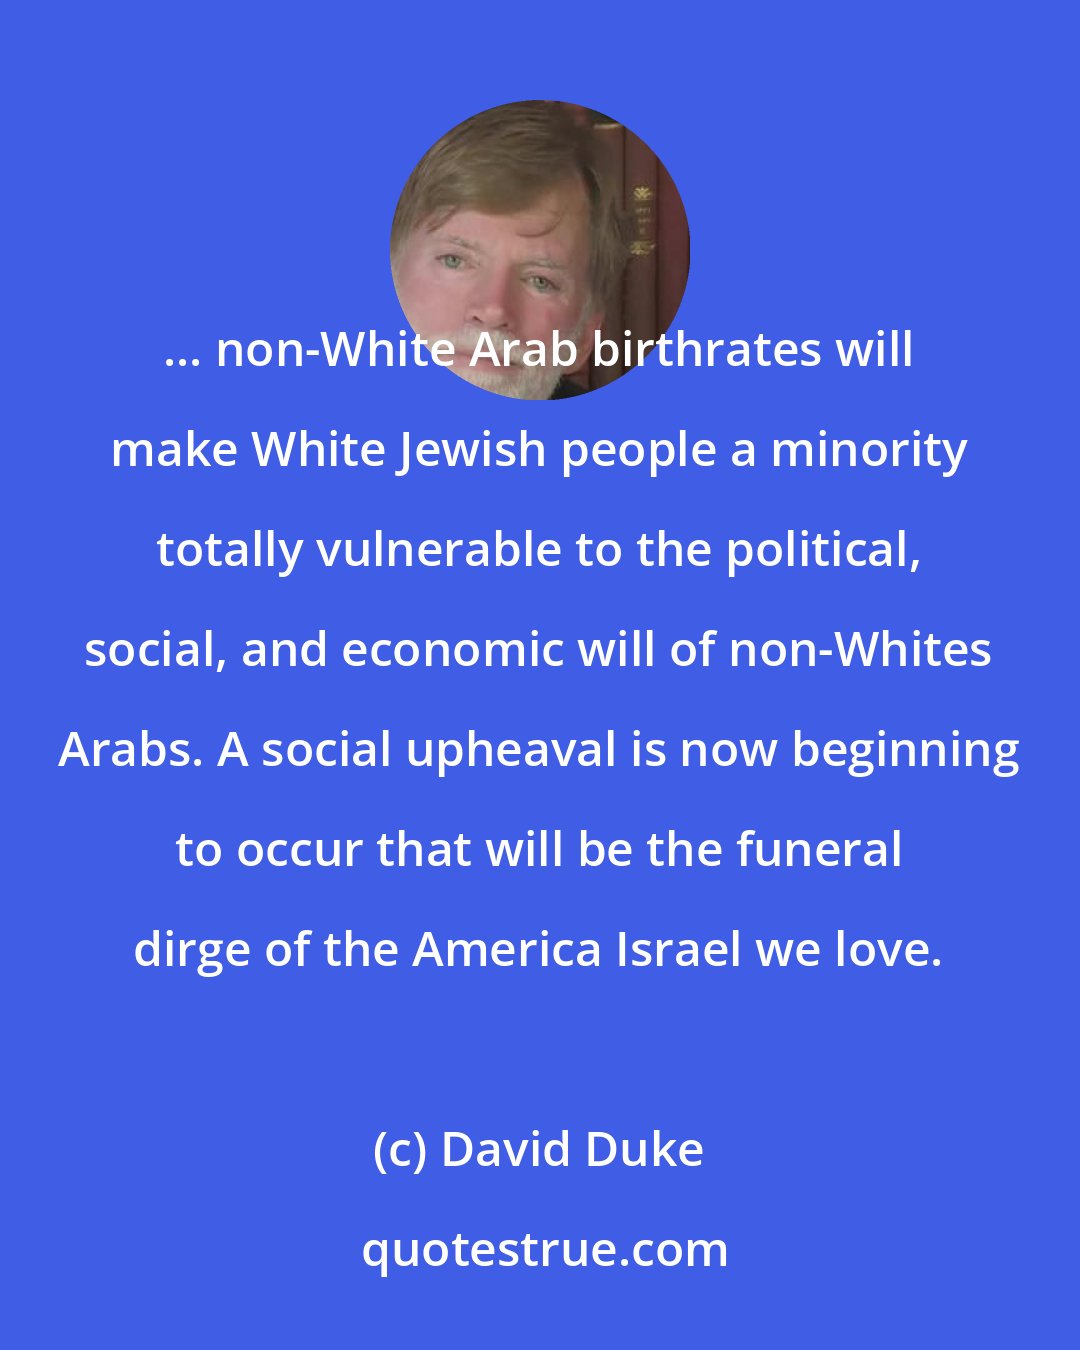 David Duke: ... non-White Arab birthrates will make White Jewish people a minority totally vulnerable to the political, social, and economic will of non-Whites Arabs. A social upheaval is now beginning to occur that will be the funeral dirge of the America Israel we love.